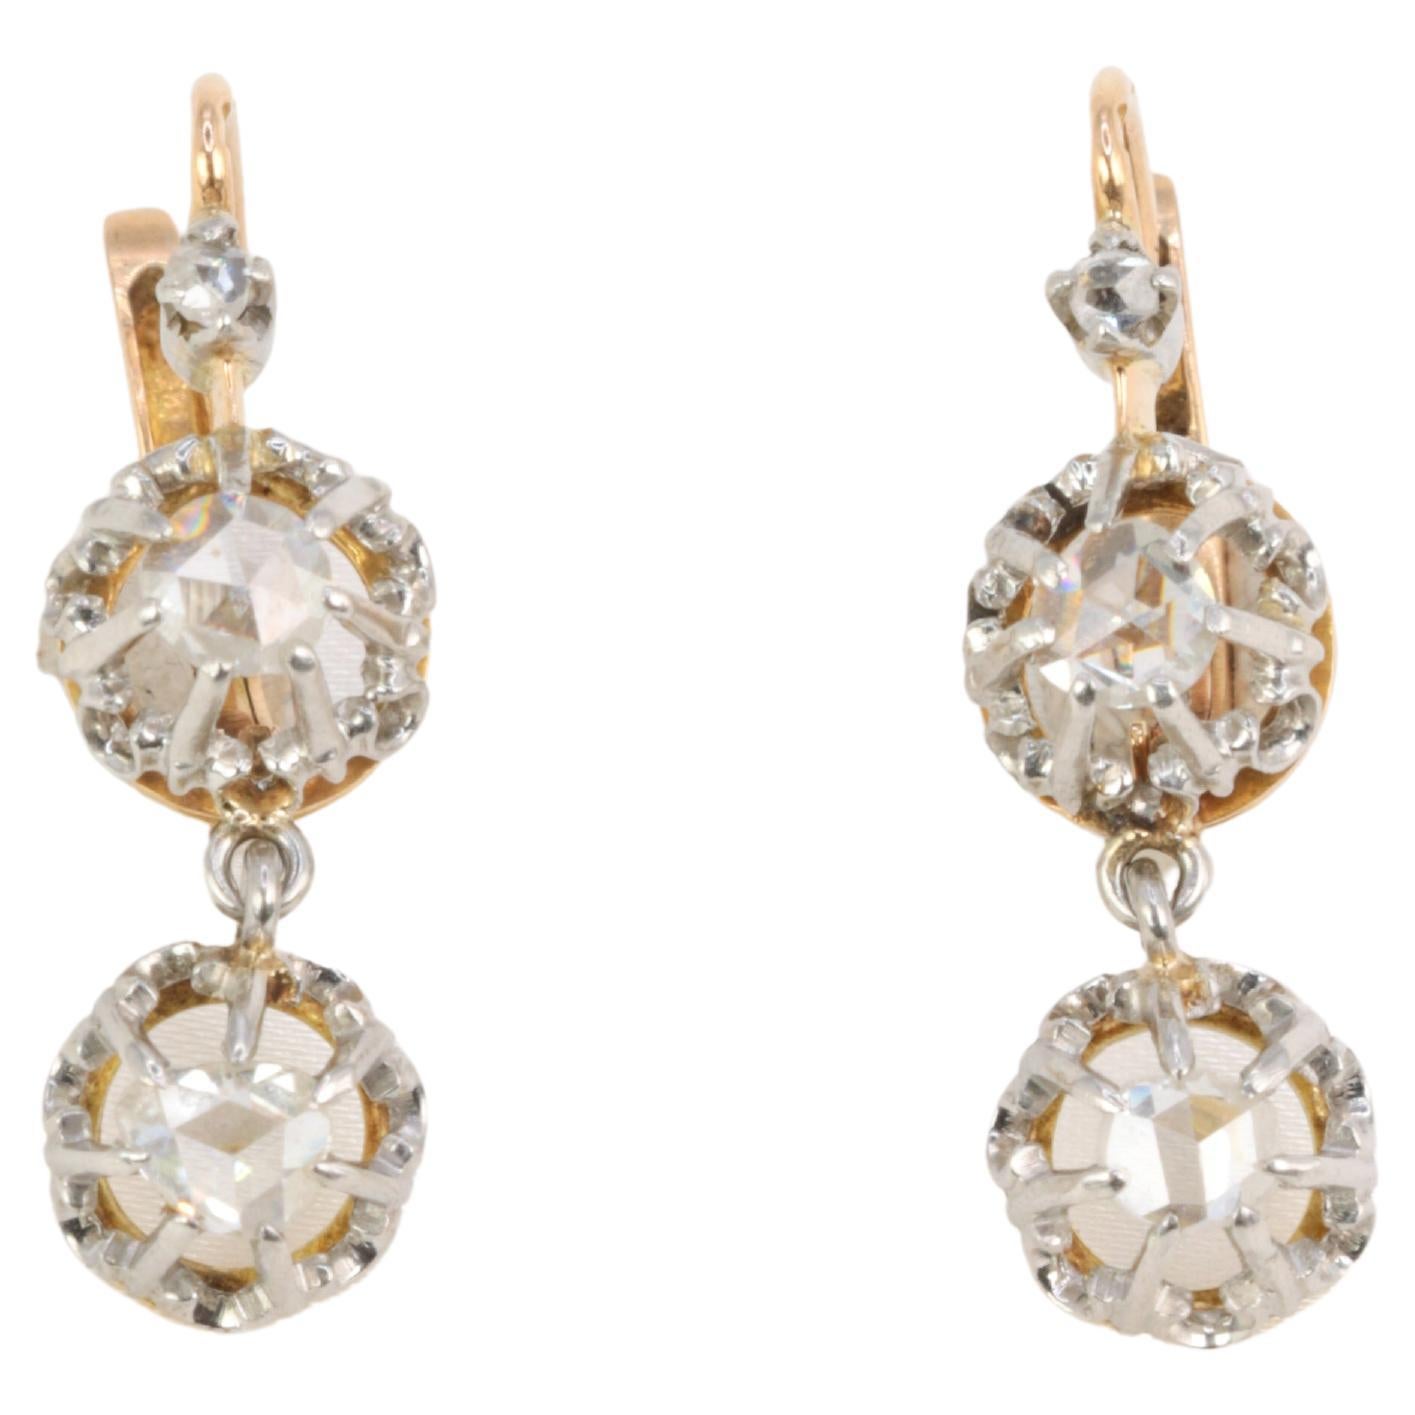 Antique dormeuse earrings in yellow gold and rose-cut diamonds